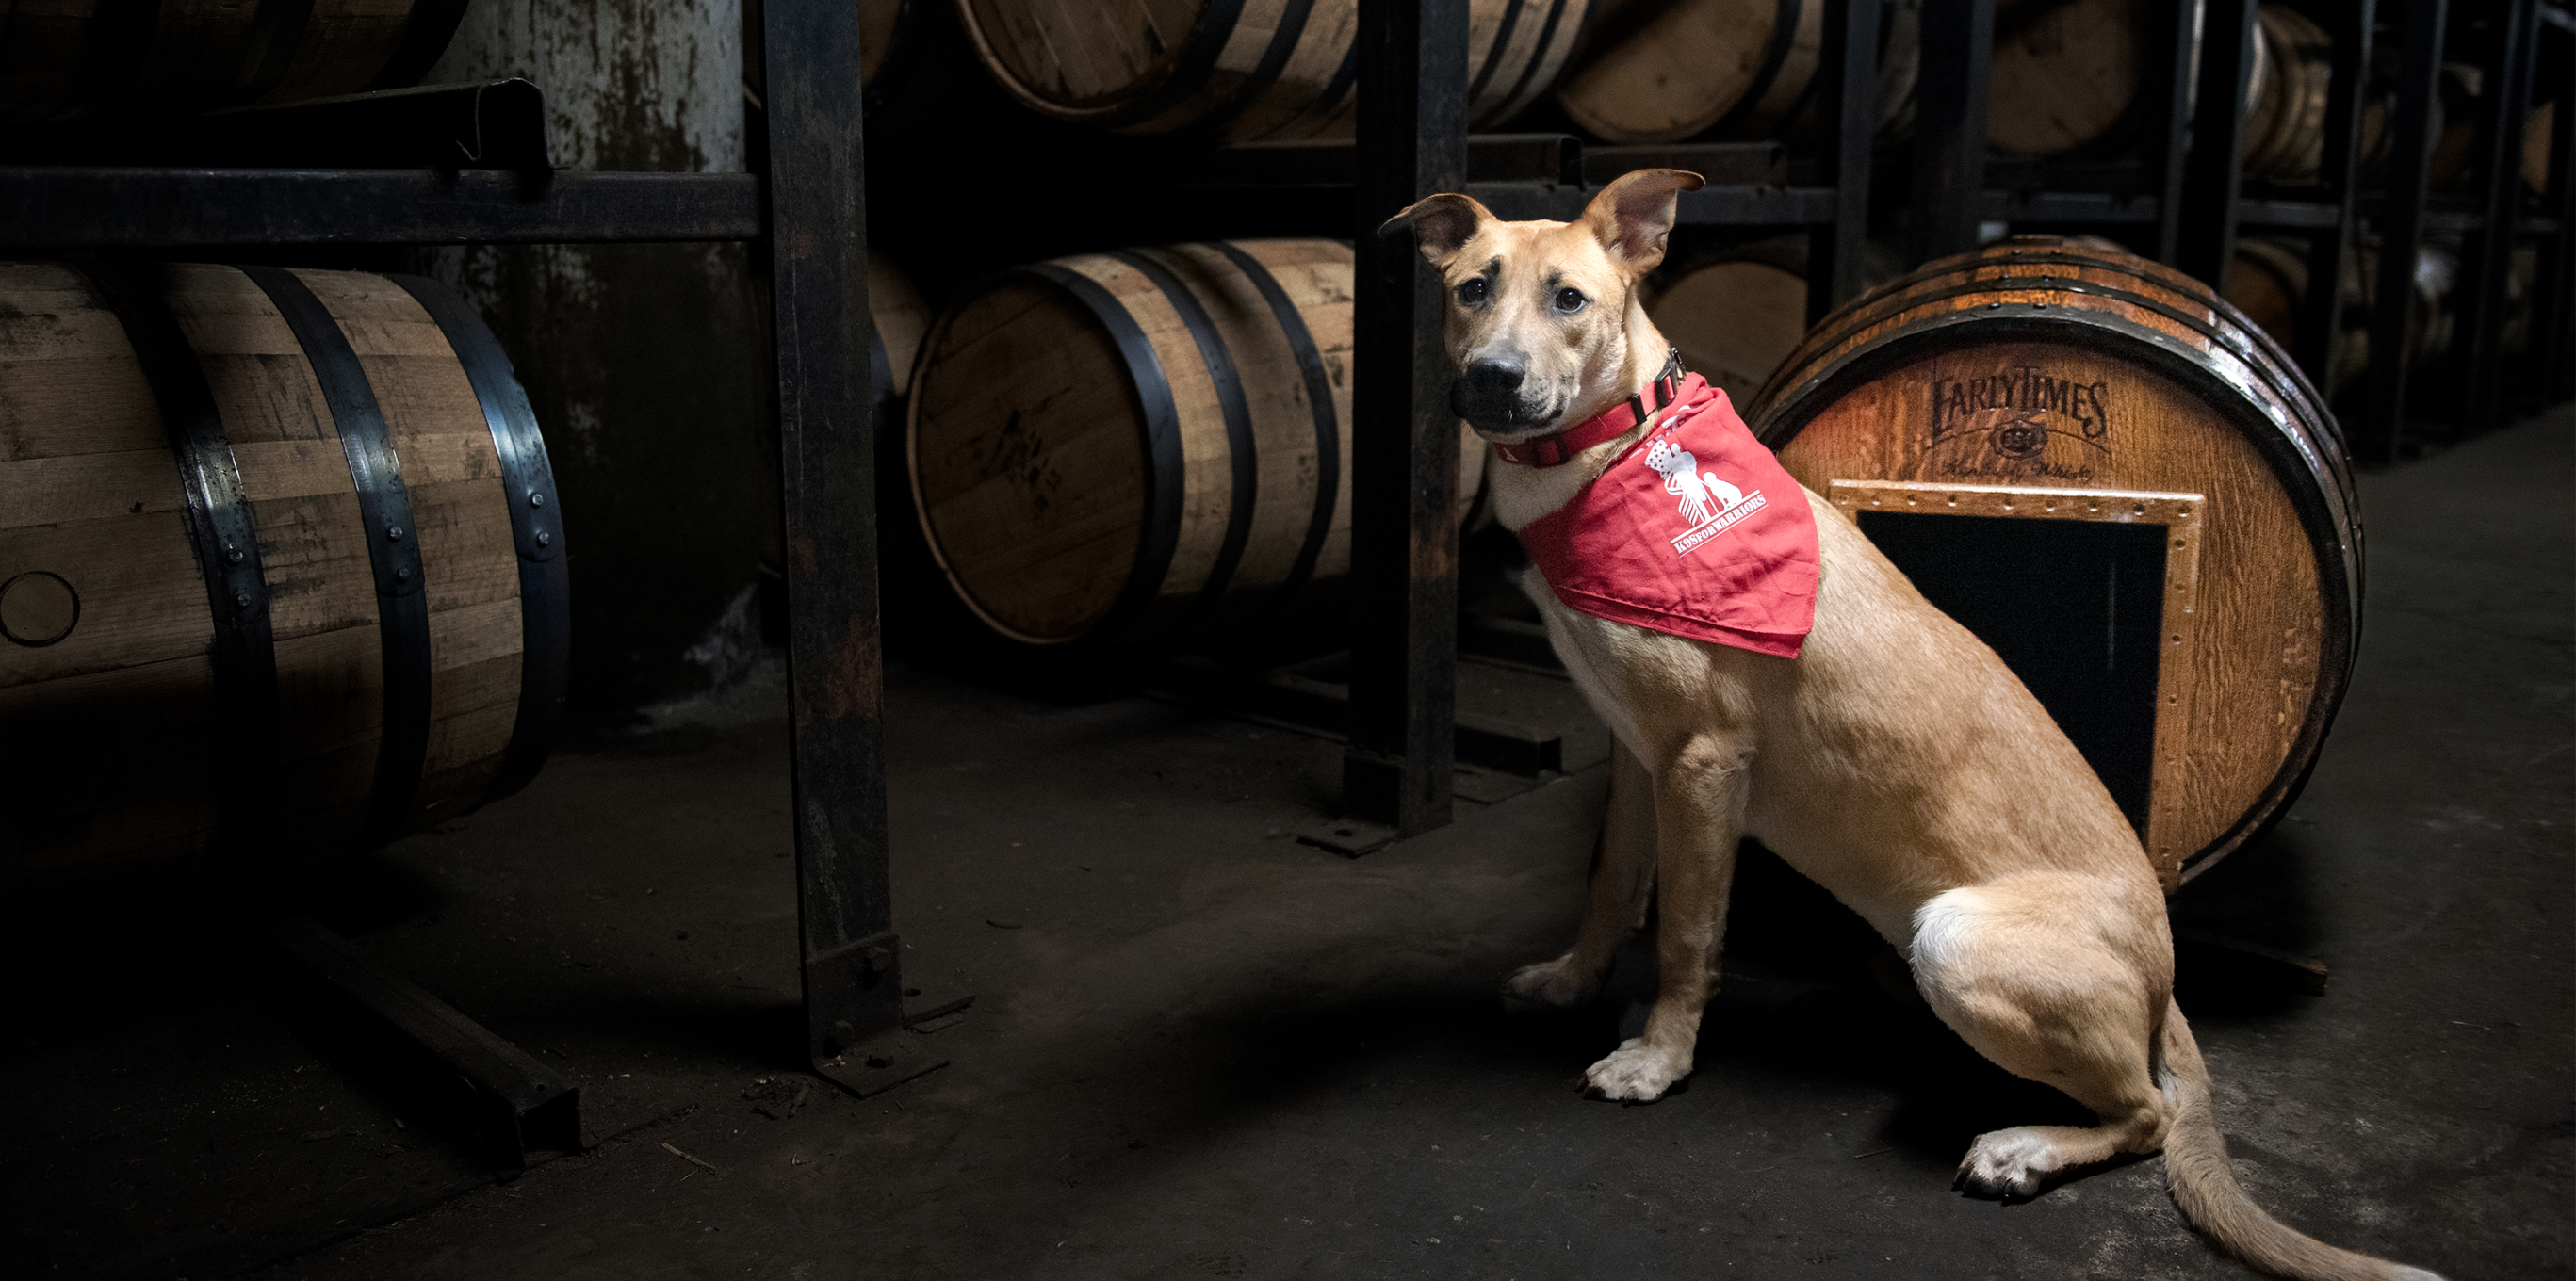 Earl the dog next to a barrel